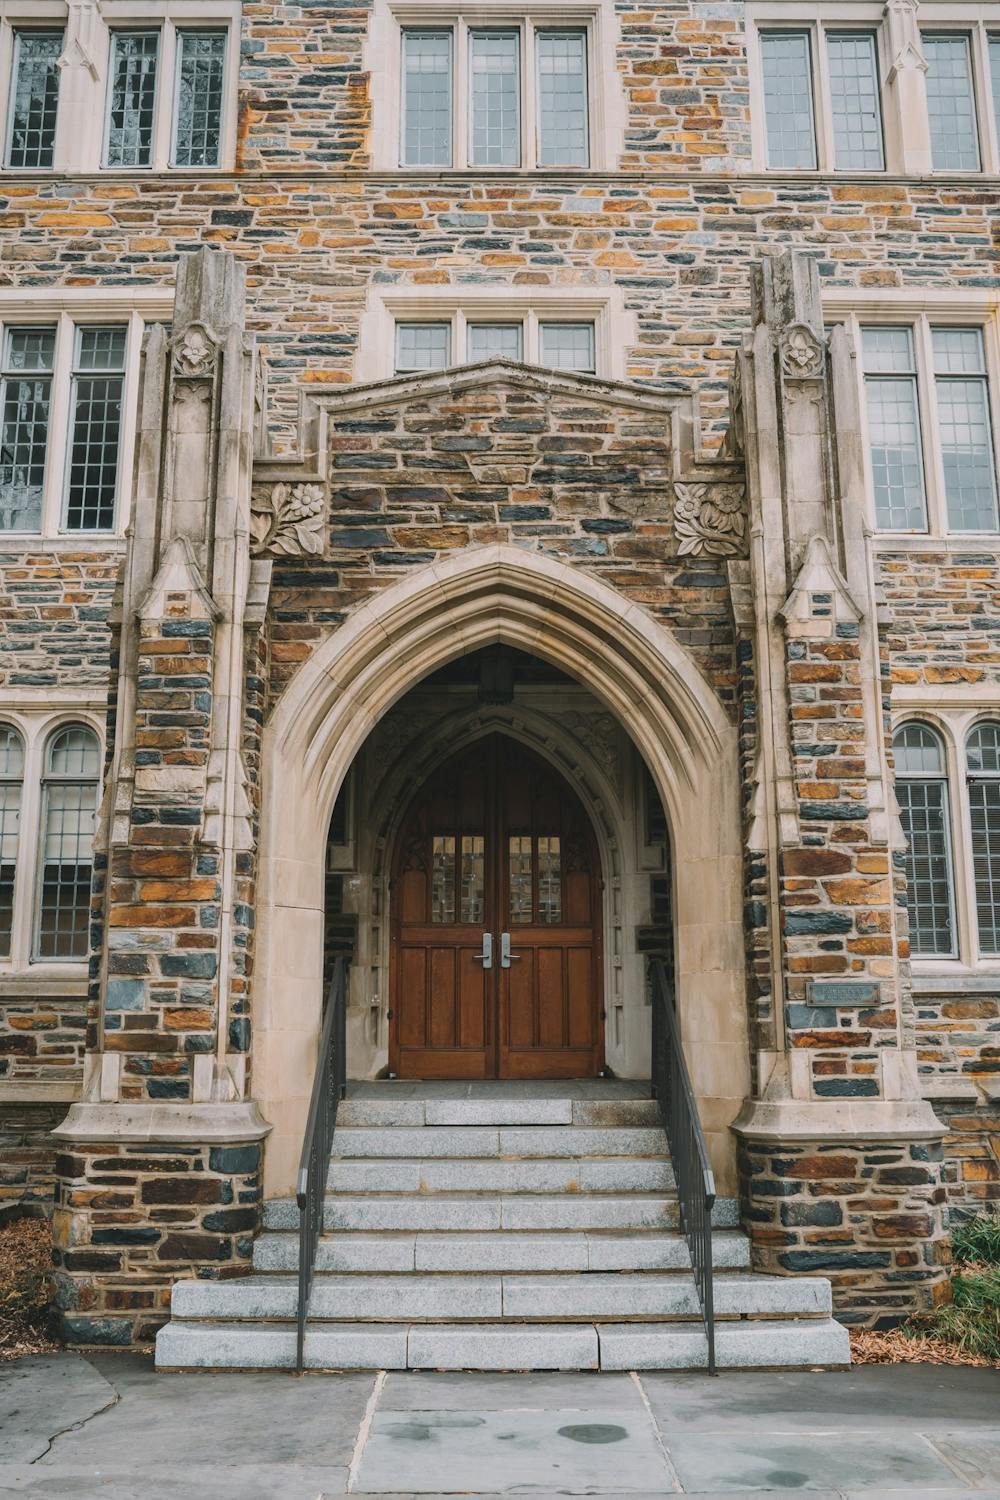 The front plaque on the main entrance of the Reuben-Cooke Building says "Sociology-Psychology", the former name of the building before the Duke University Board of Trustees voted unanimously to rename the building in honor of Wilhelmina Reuben-Cooke, ’67 in September 2020.